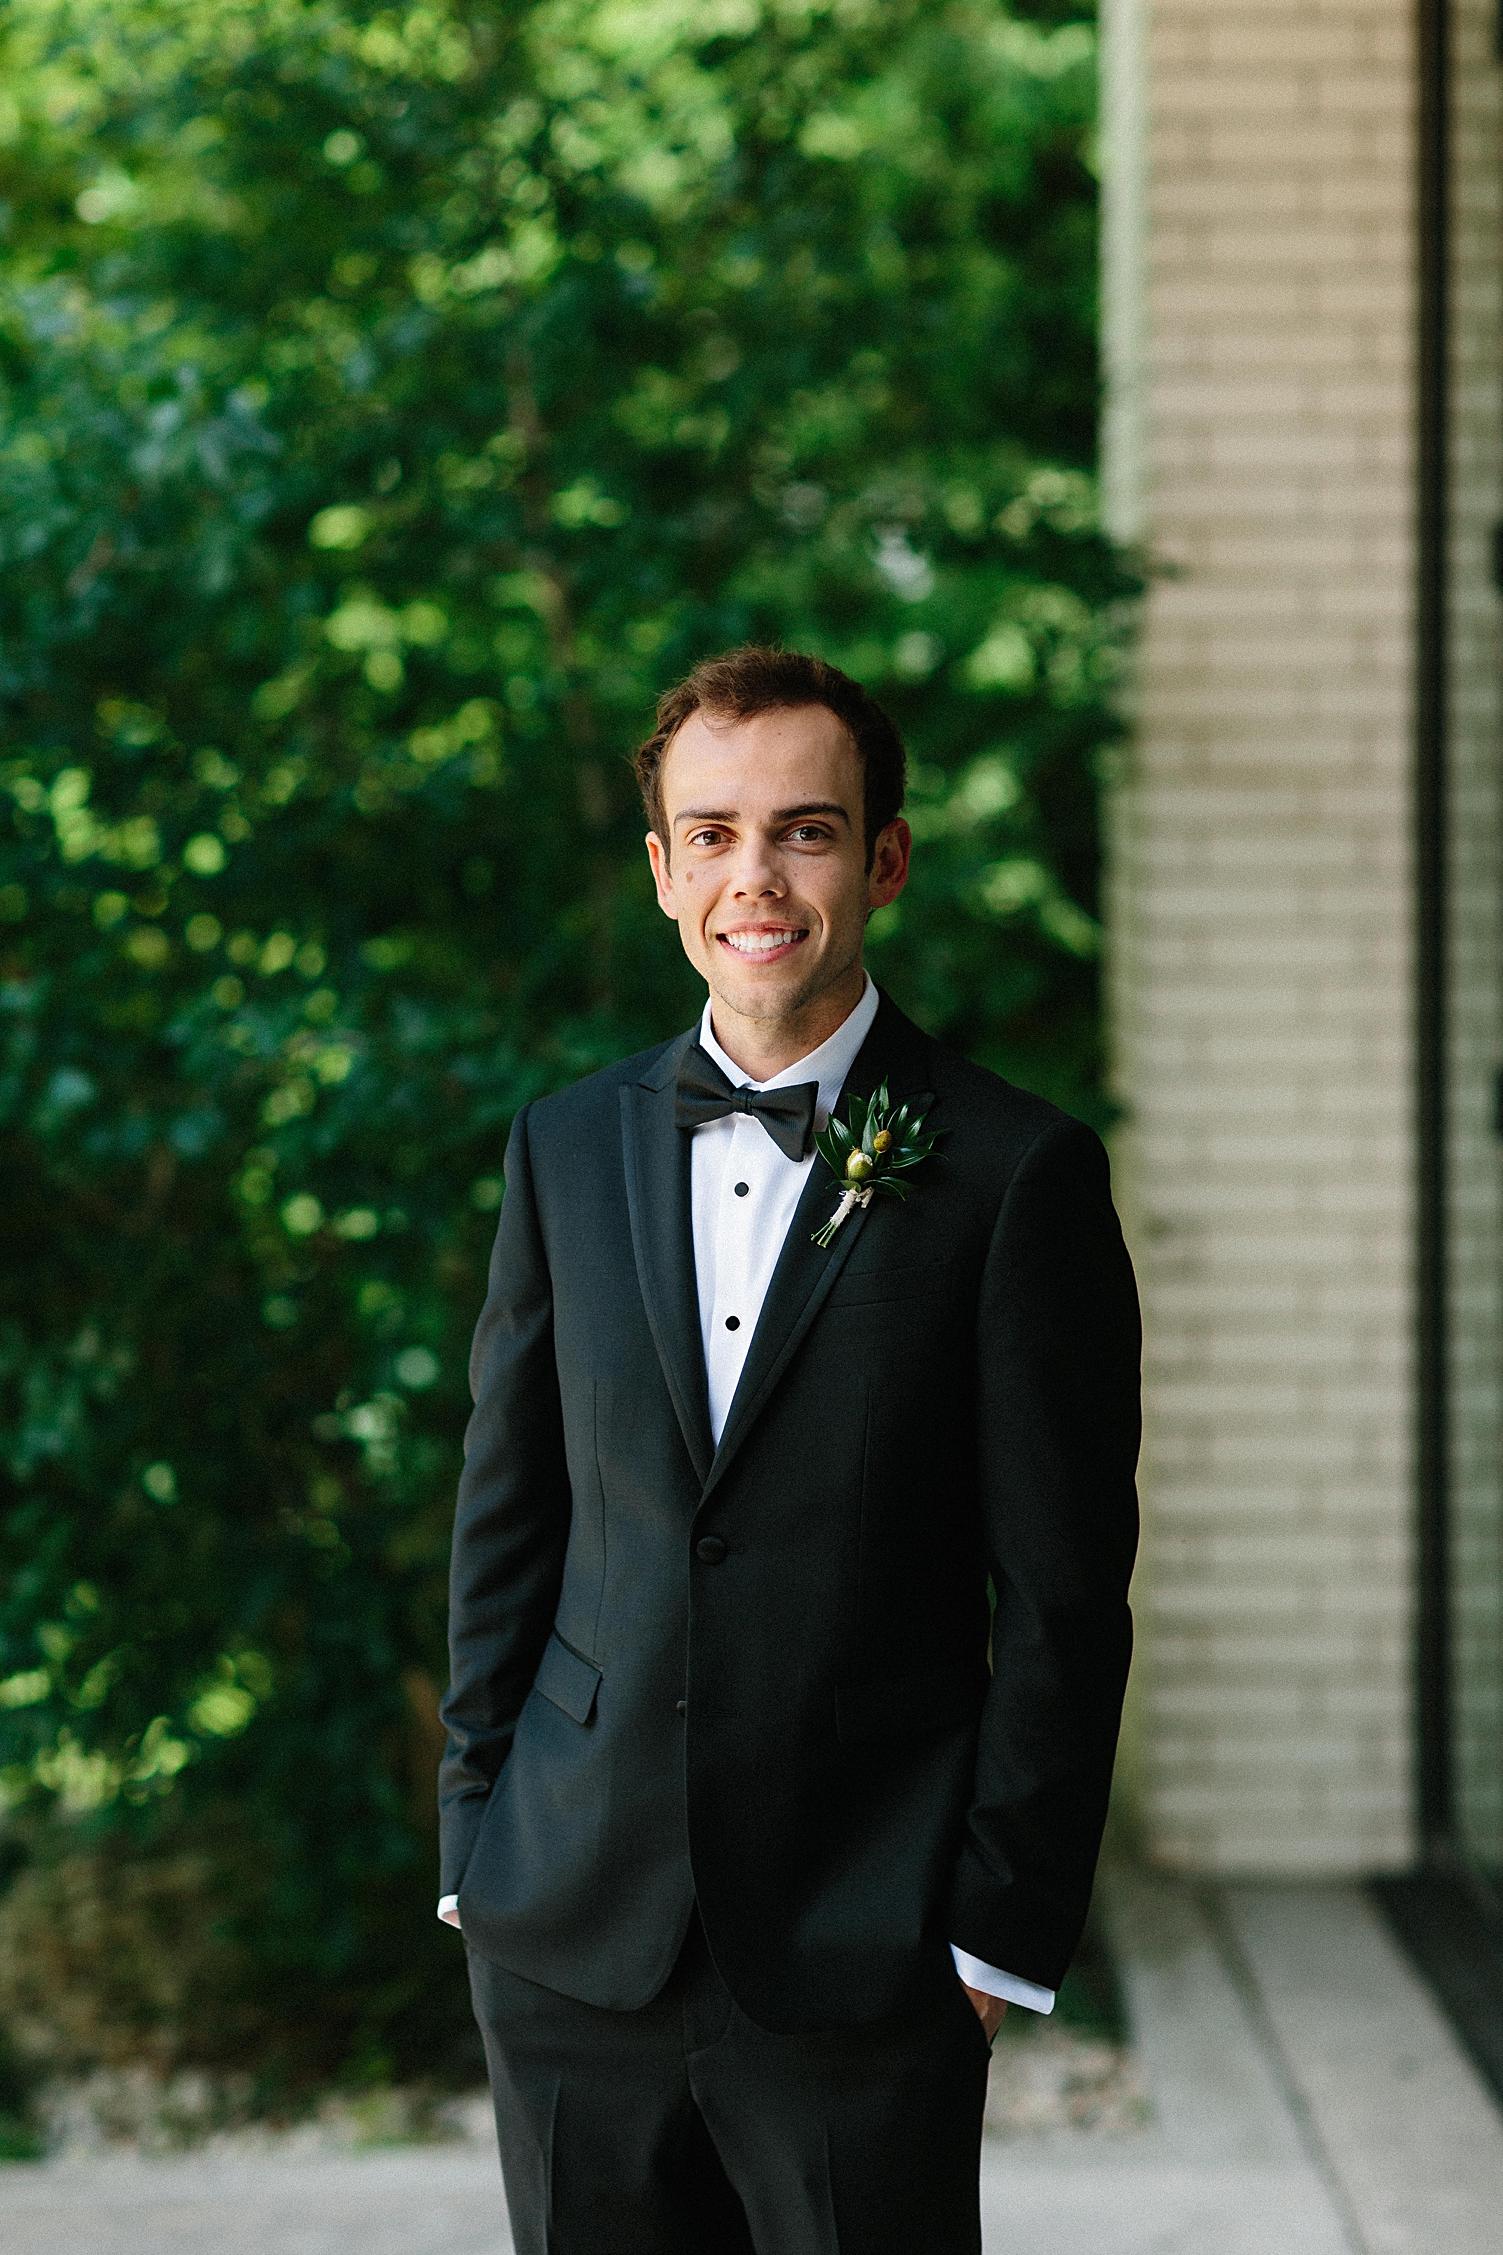 Groom in tuxedo at South Congress Hotel Austin bow tie smiling